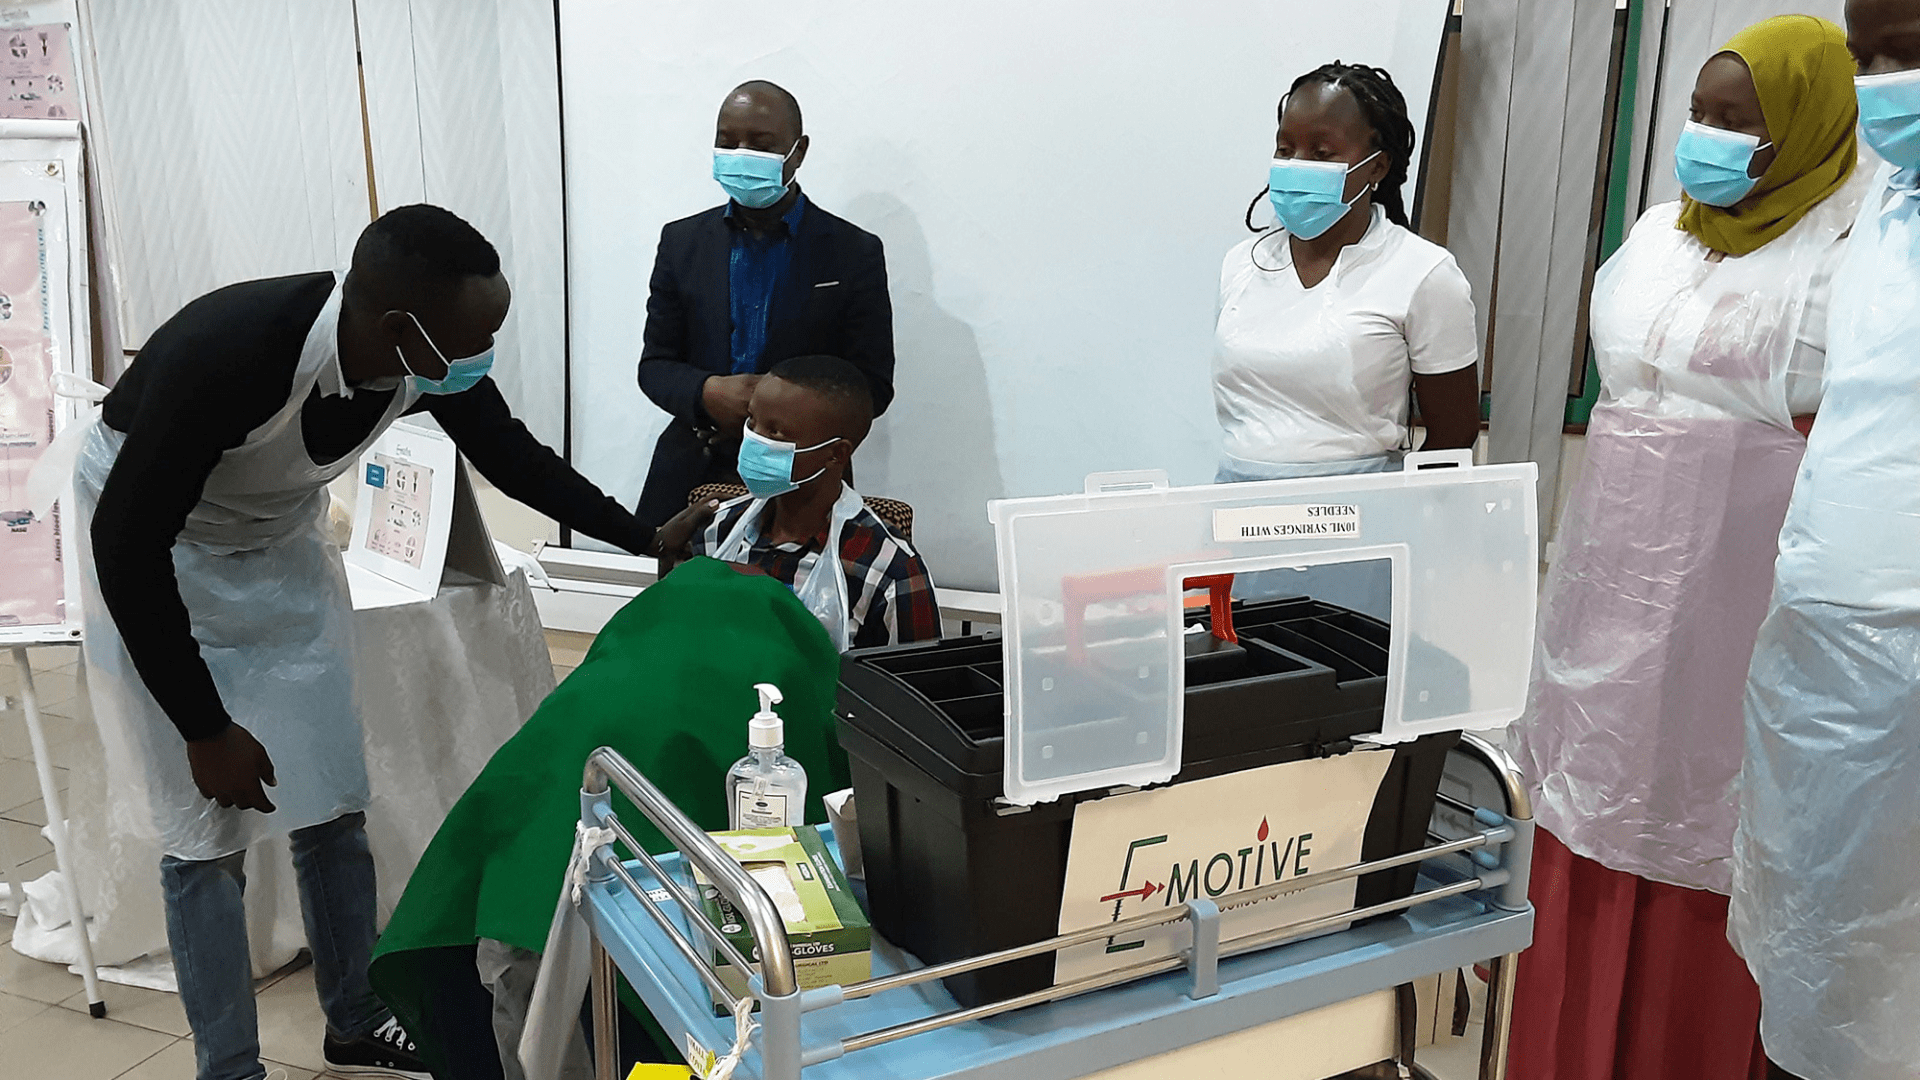 a group of healthcare professionals in Tanzania investigate the contents of a E-MOTIVE box, trialling its use.